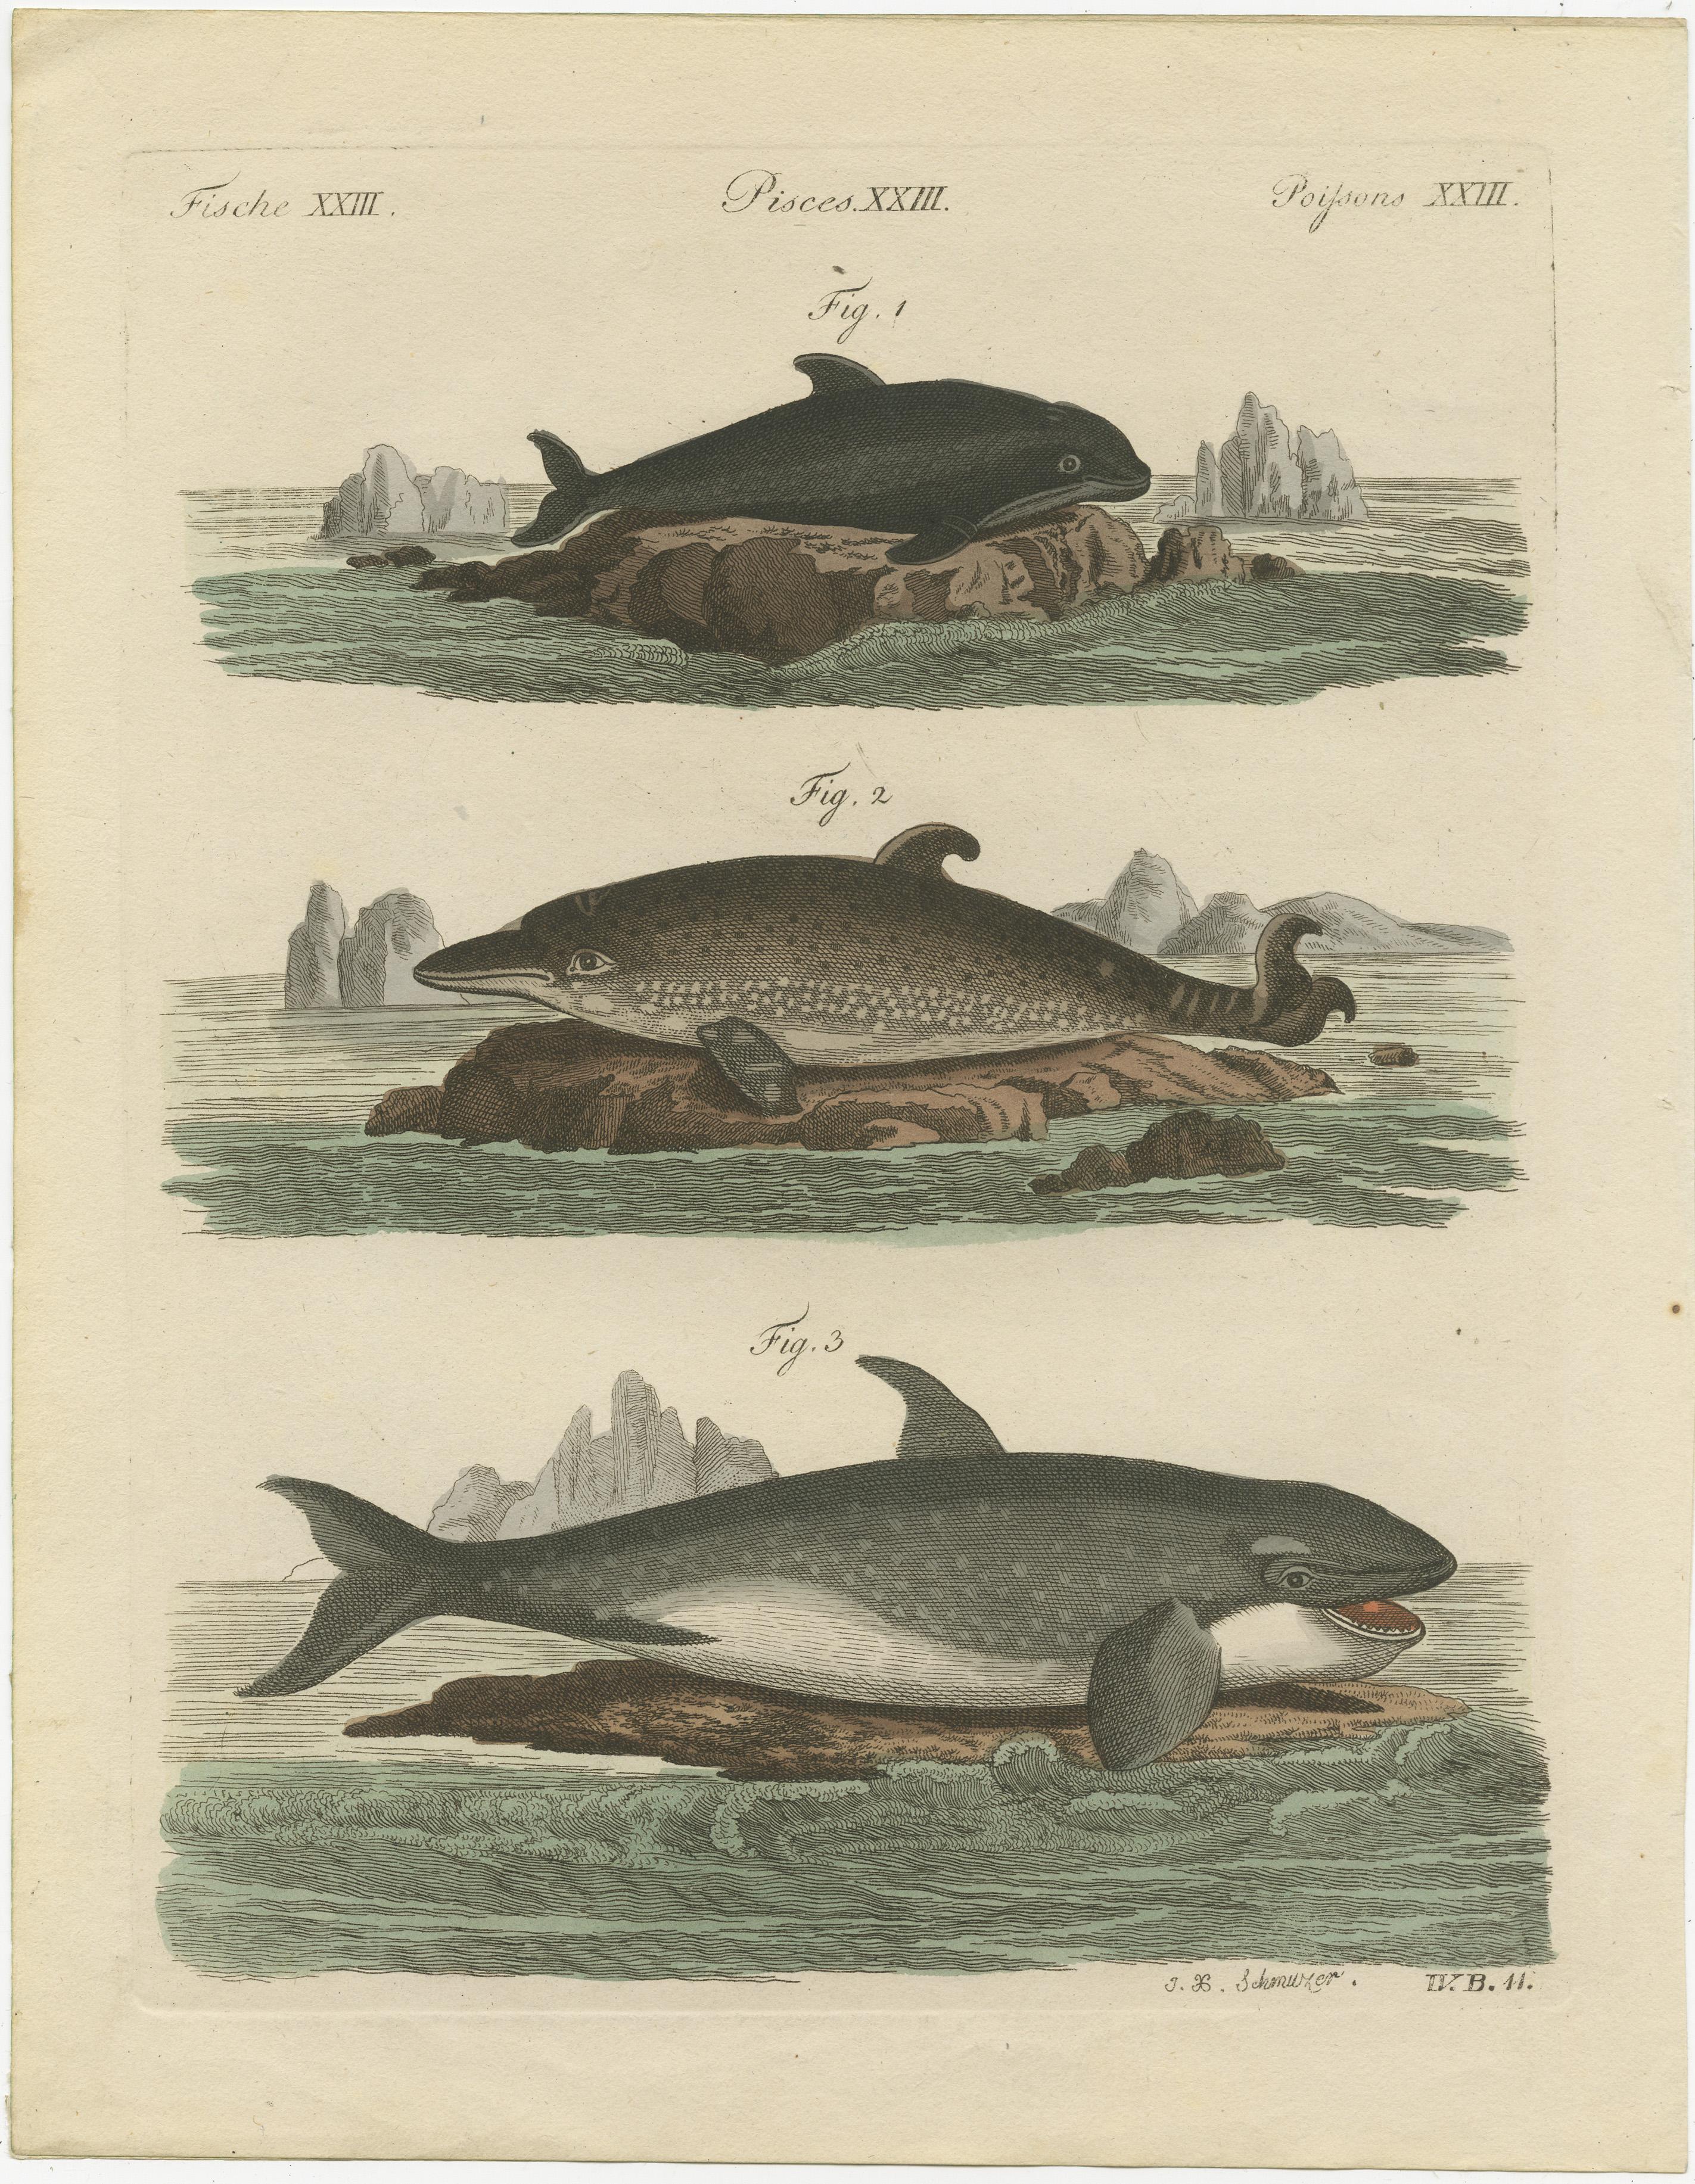 Harbour porpoise, Phocoena phocoena 1, short-beaked common dolphin, Delphinus delphis 2, and orca or killer whale, Orcinus orca 3. Source unknown, to be determined. Most likely published by or after Bertuch, circa 1795.